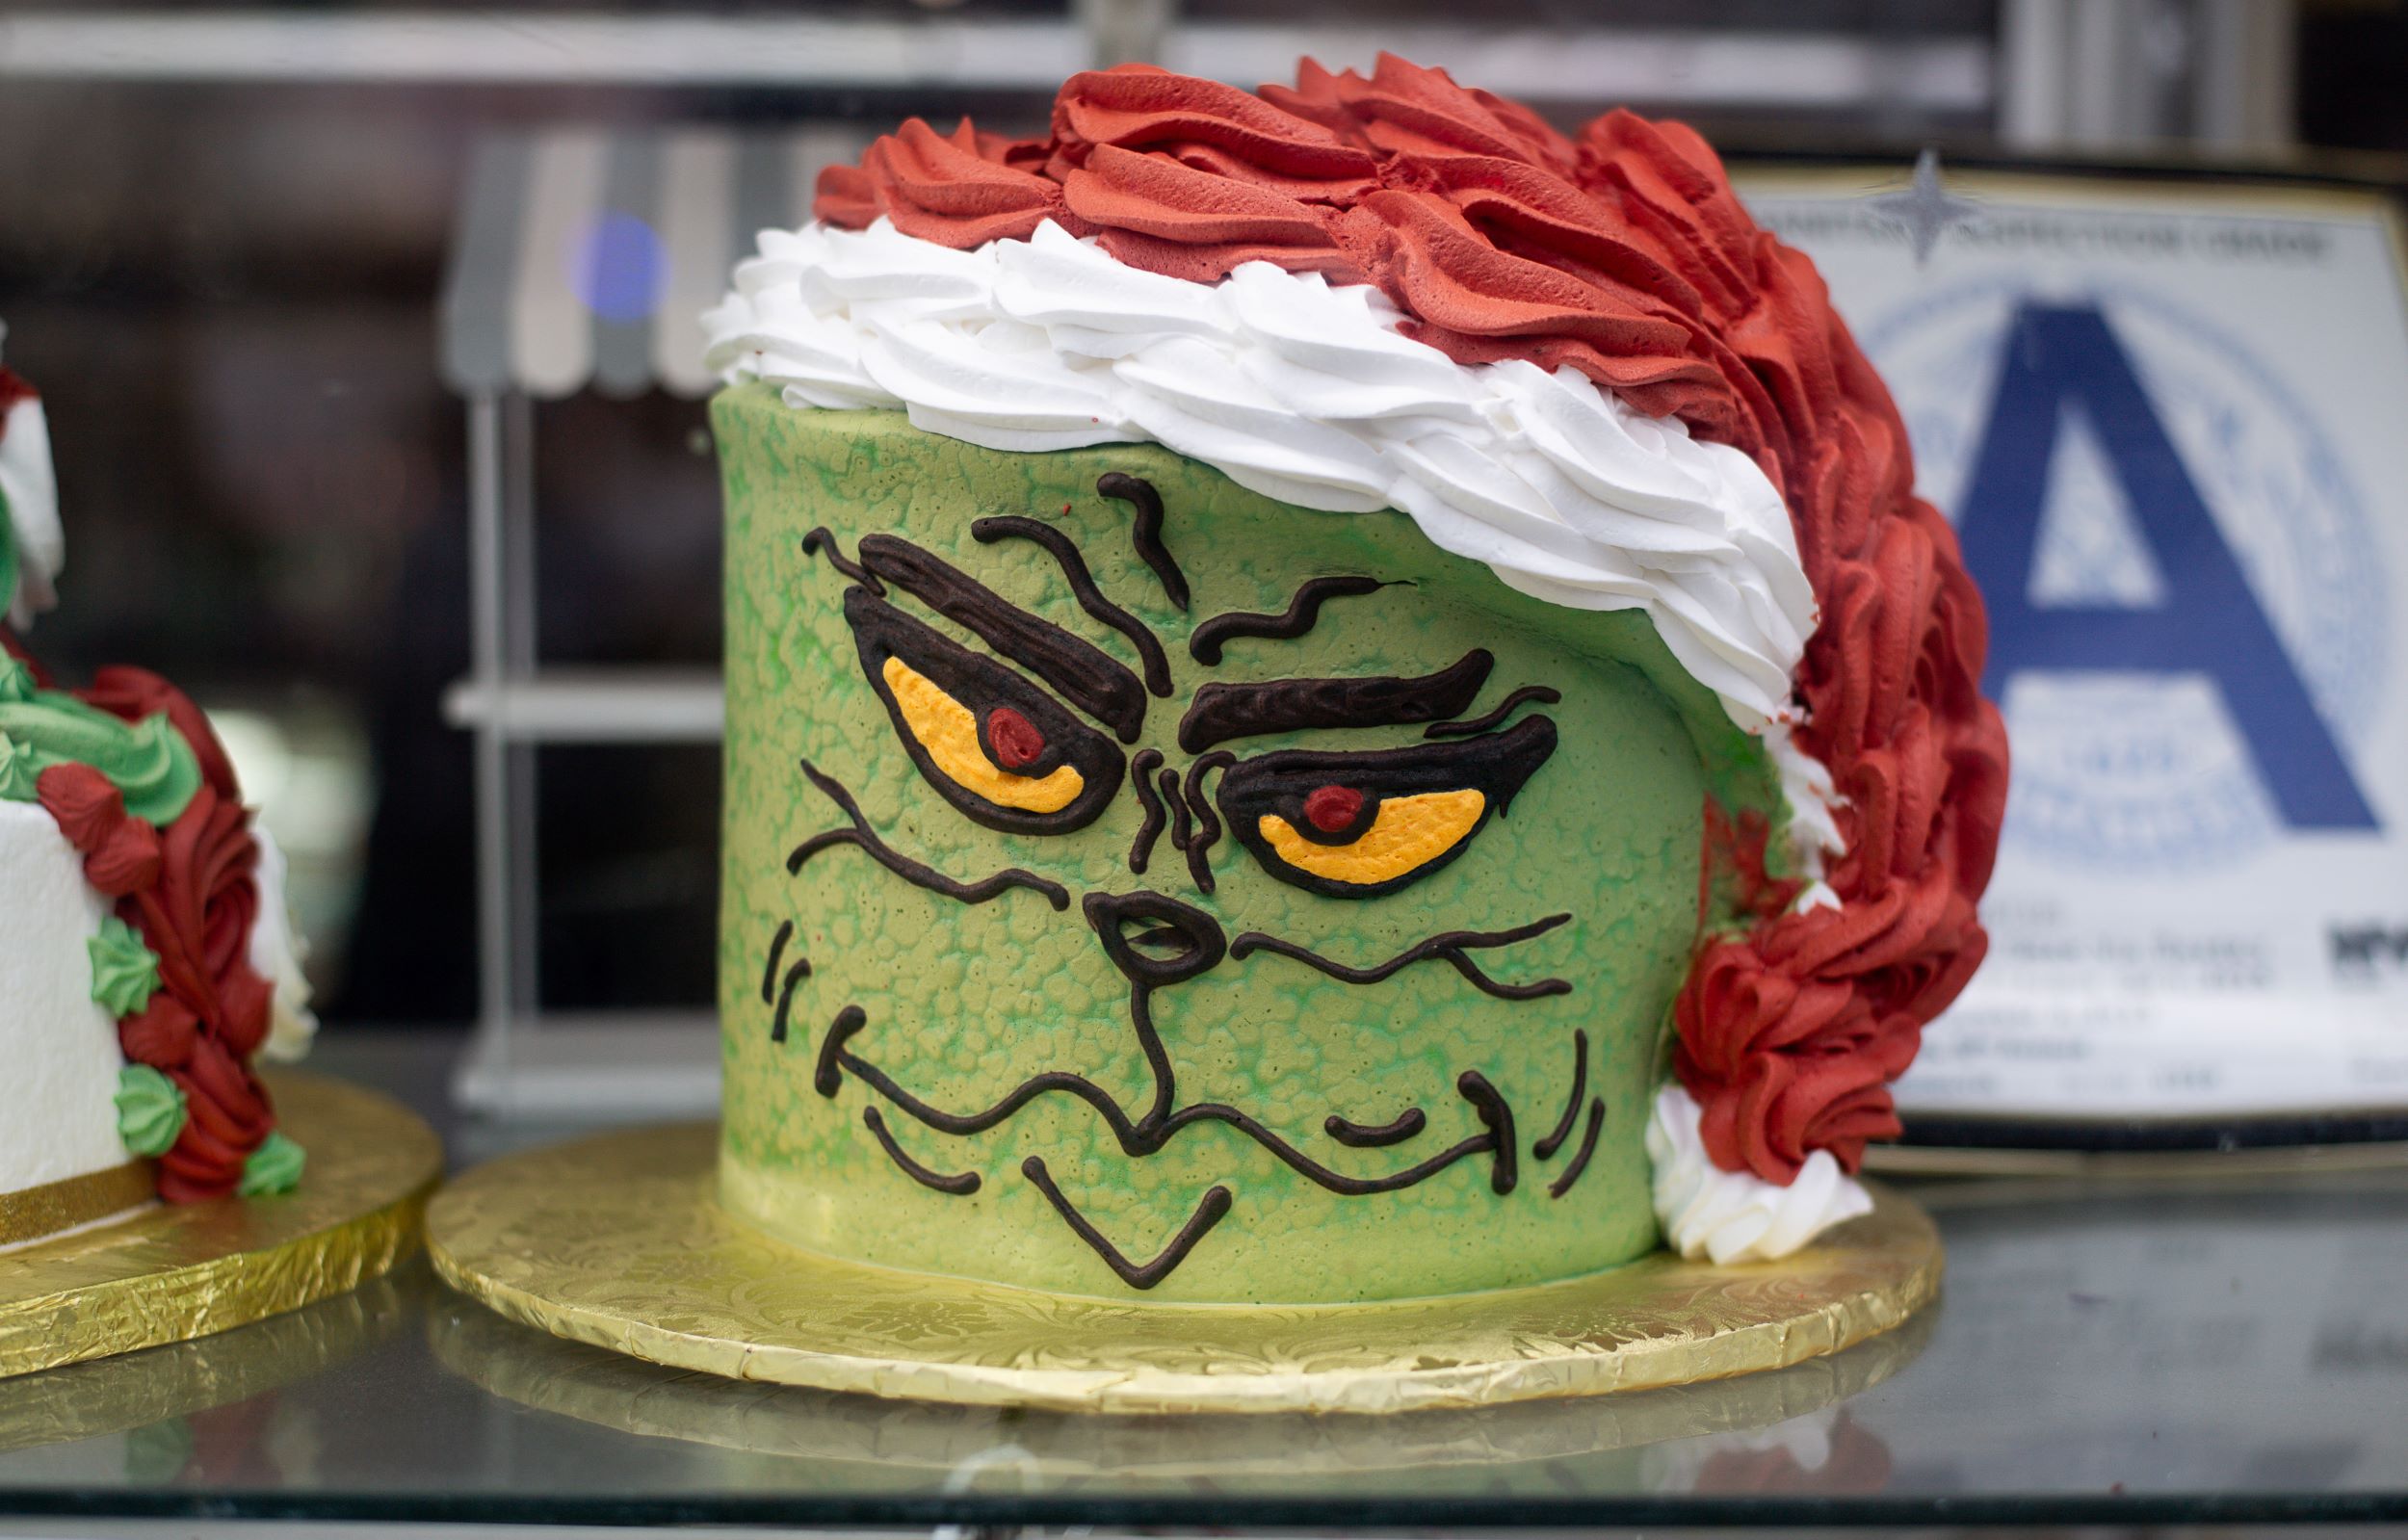 A detailed cake decorated like a green monster face with expressive eyes and a menacing expression, topped with red and white icing, displayed on a gold plate.